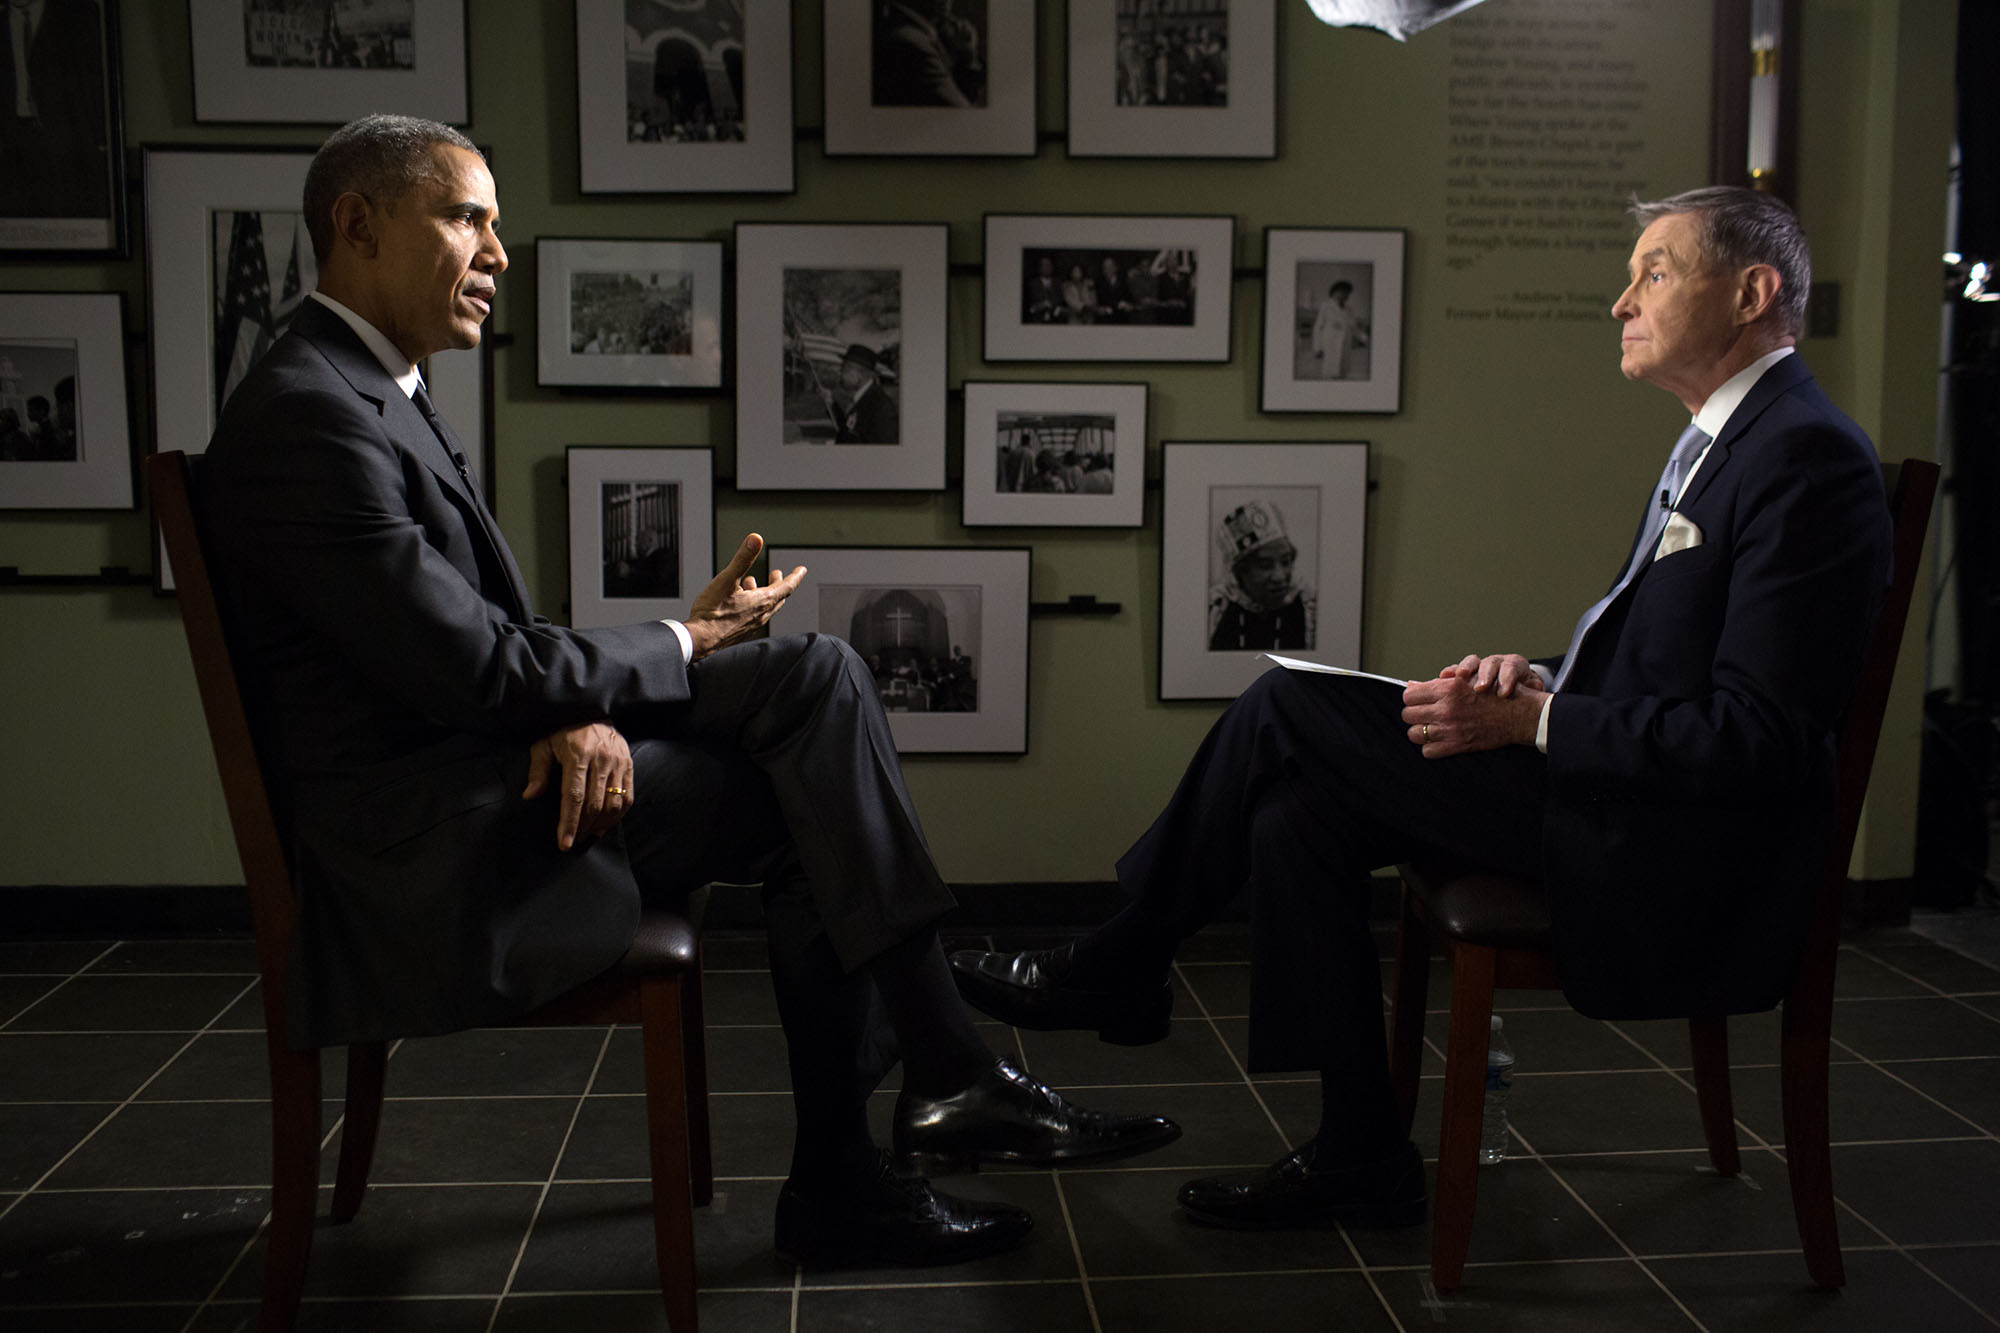 CBS-TV reporter Bill Plante, who covered "Bloody Sunday" 50 years ago, interviews the President at the museum. (Official White House Photo by Pete Souza)